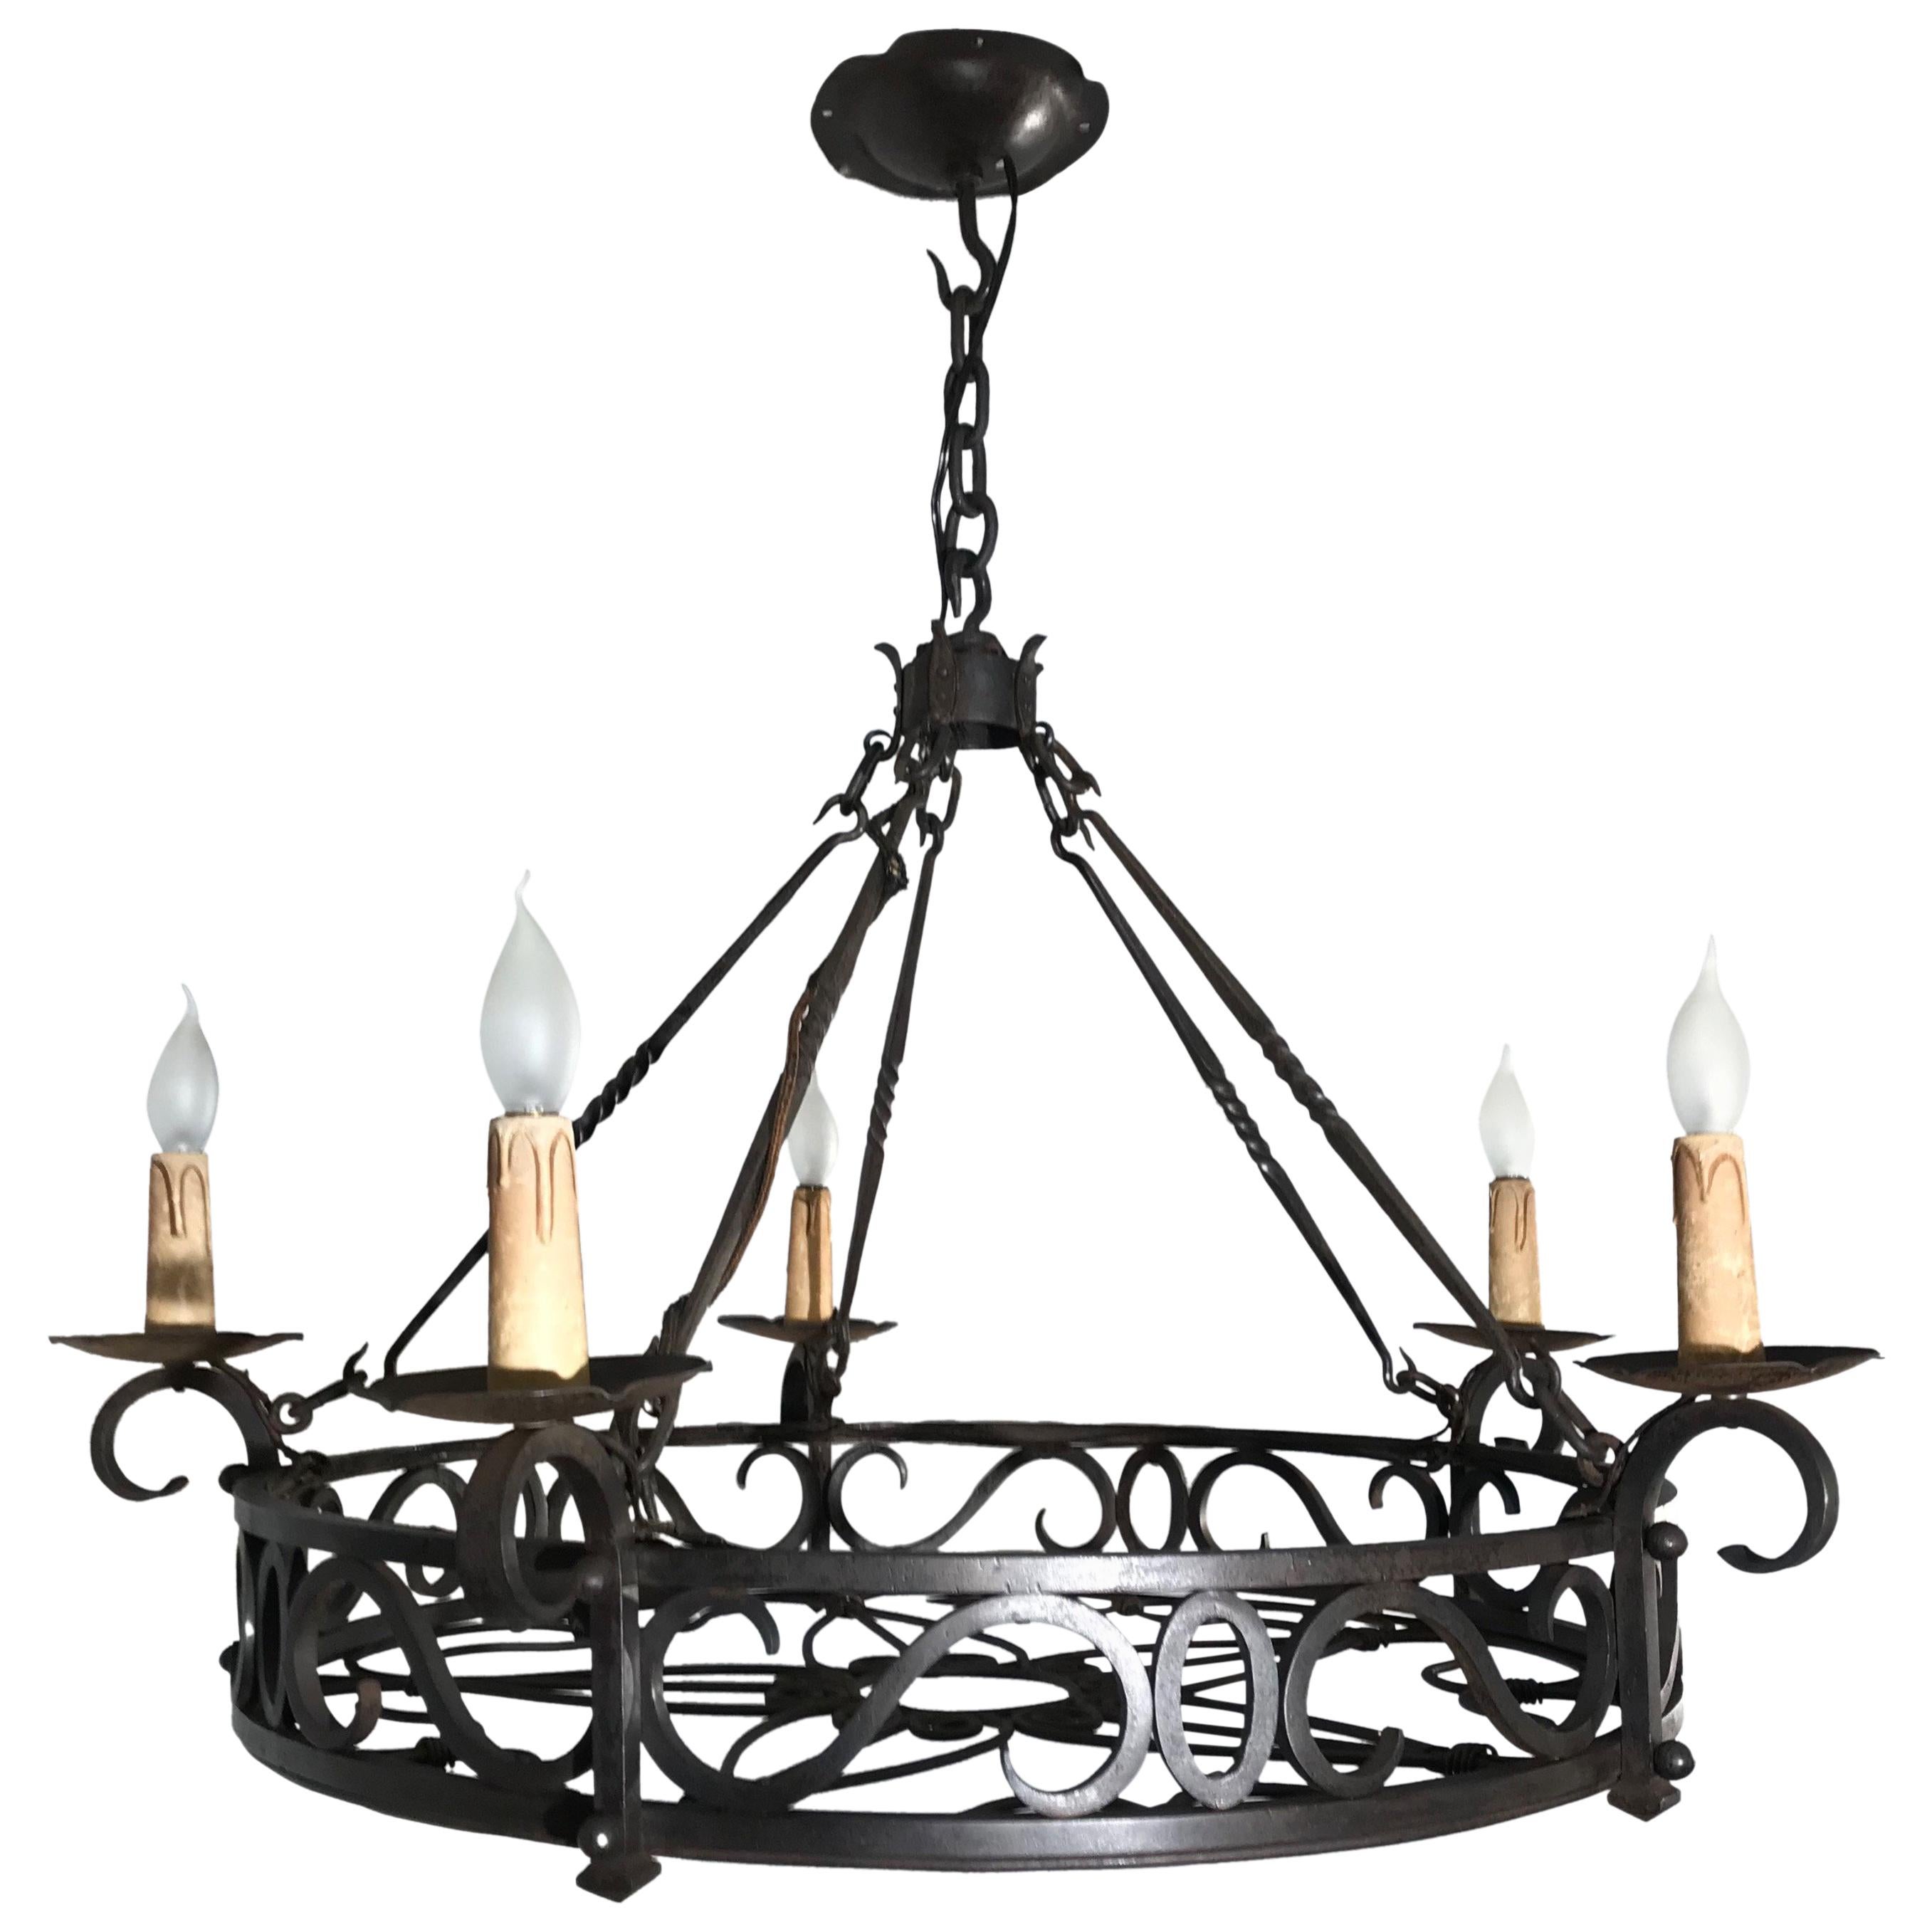 Large Arts & Crafts Wrought Iron Chandelier for Dining Room or Restaurant Etc.